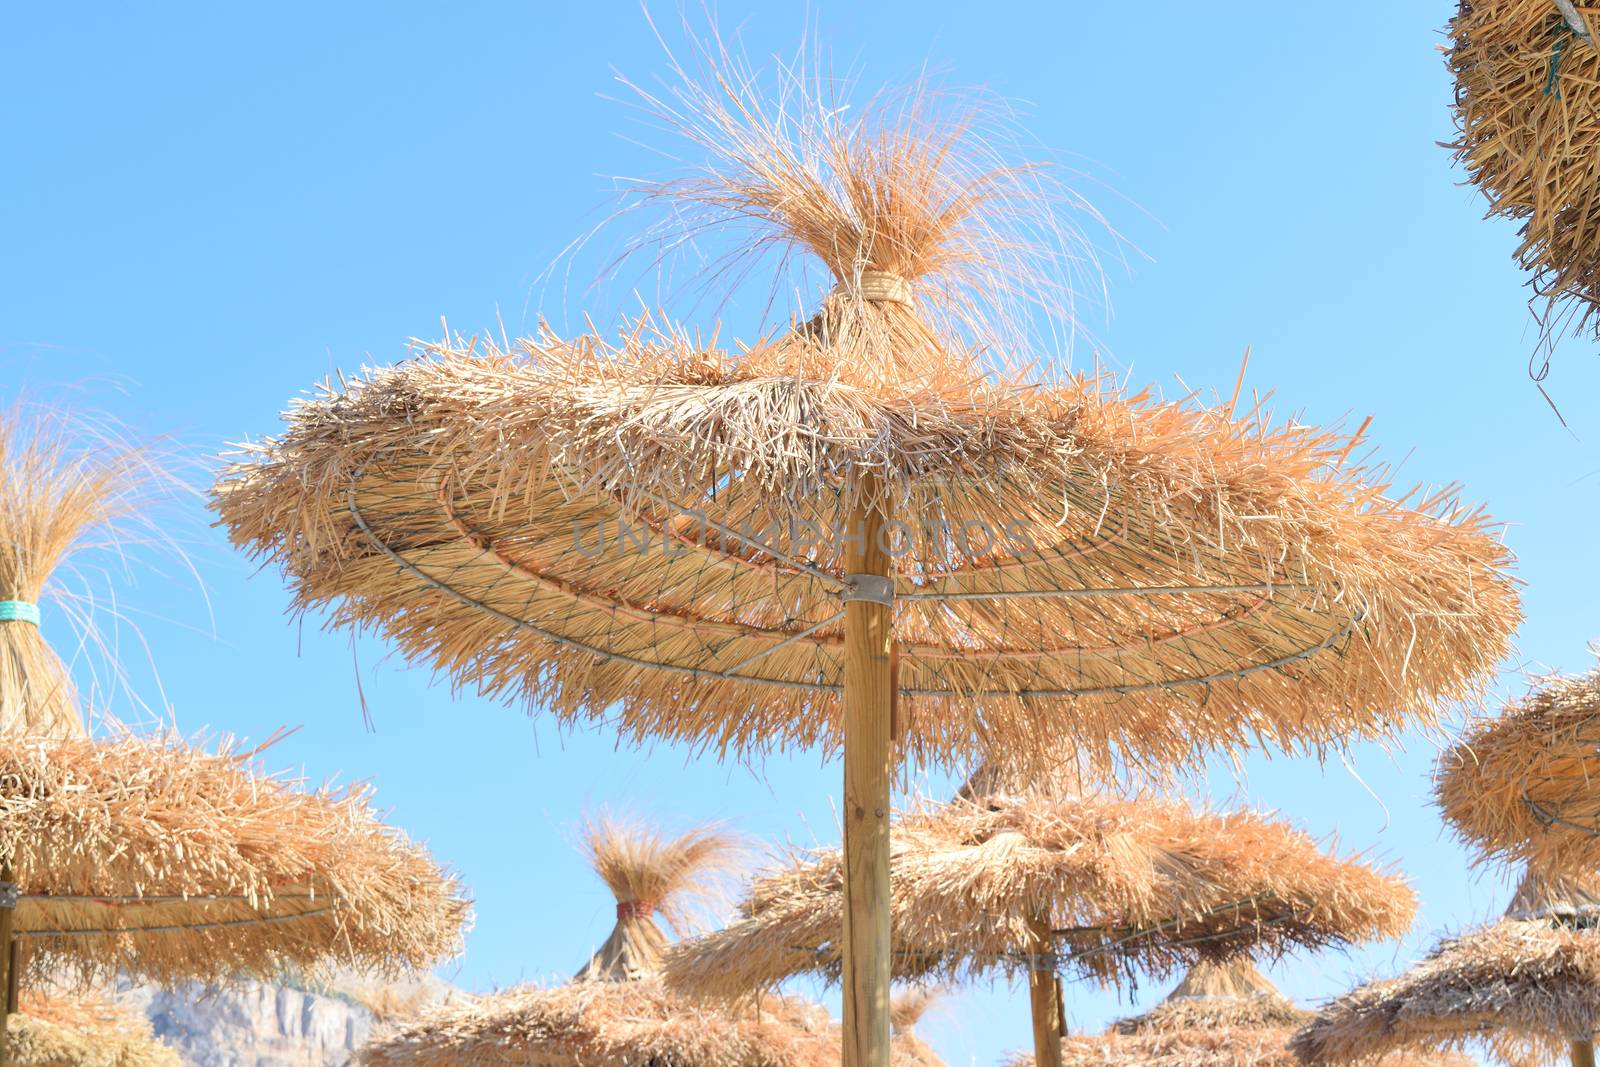 Straw parasols at the beach in summer